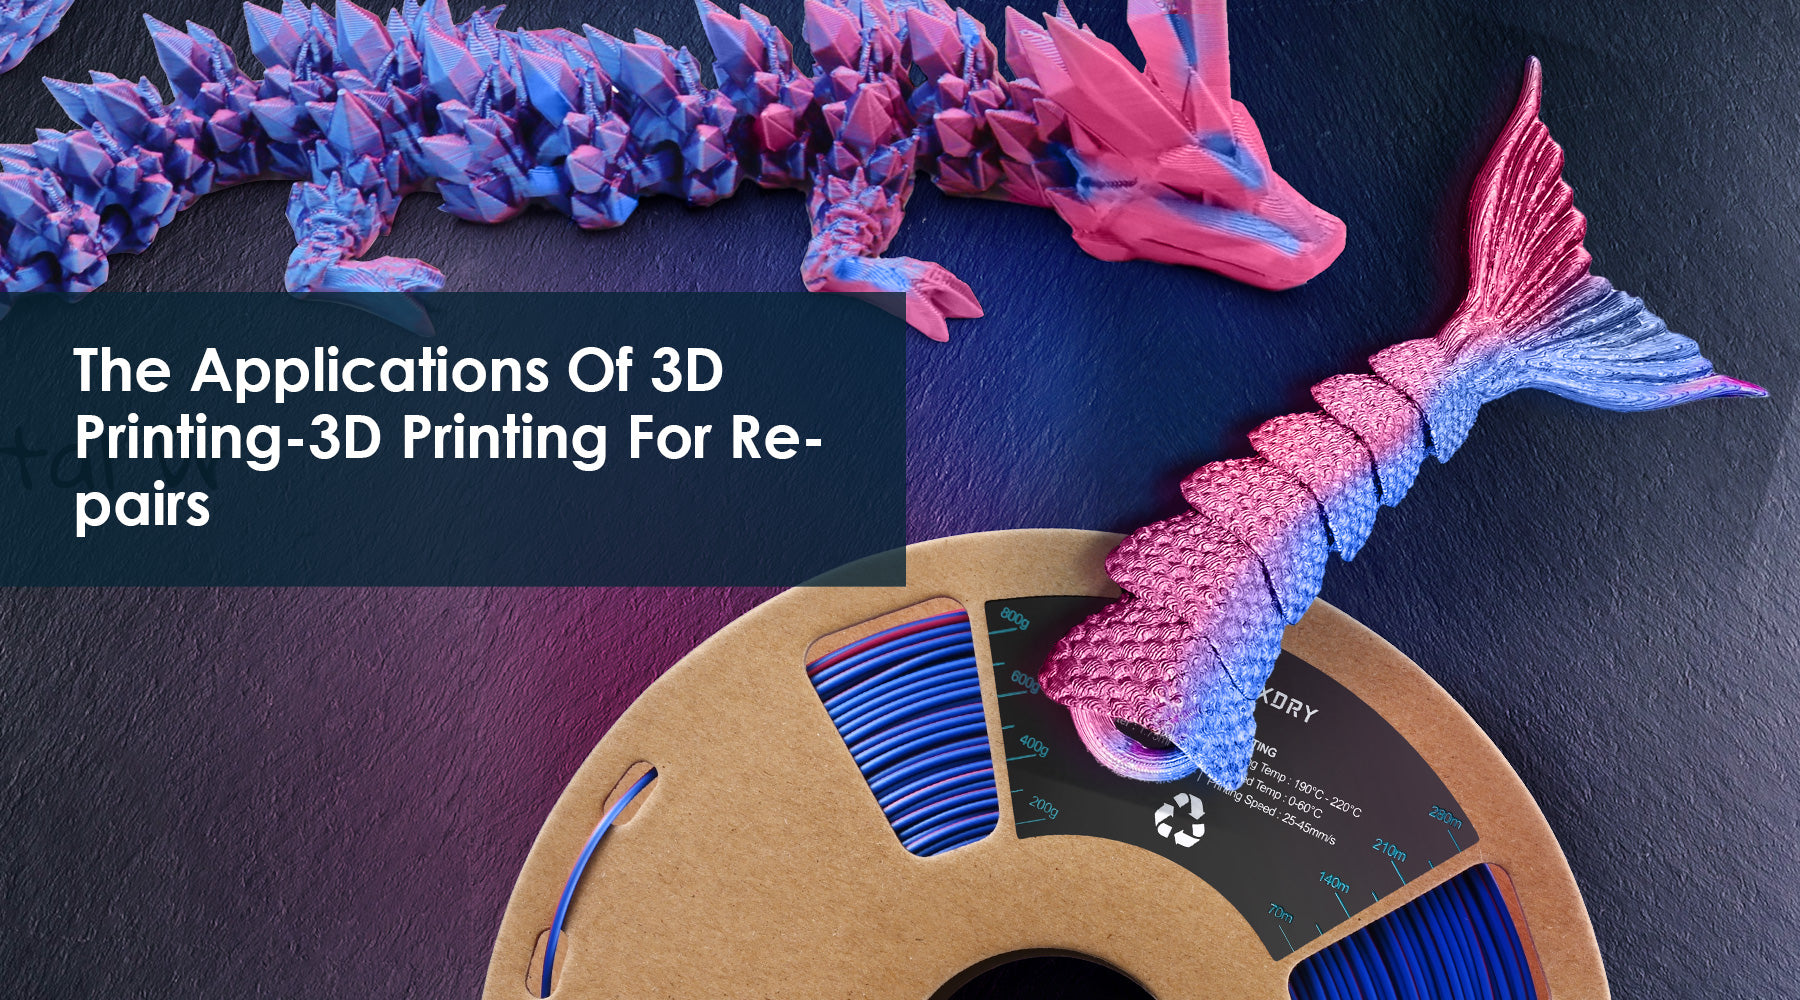 The Applications of 3D Printing-3D Printing For Repairs